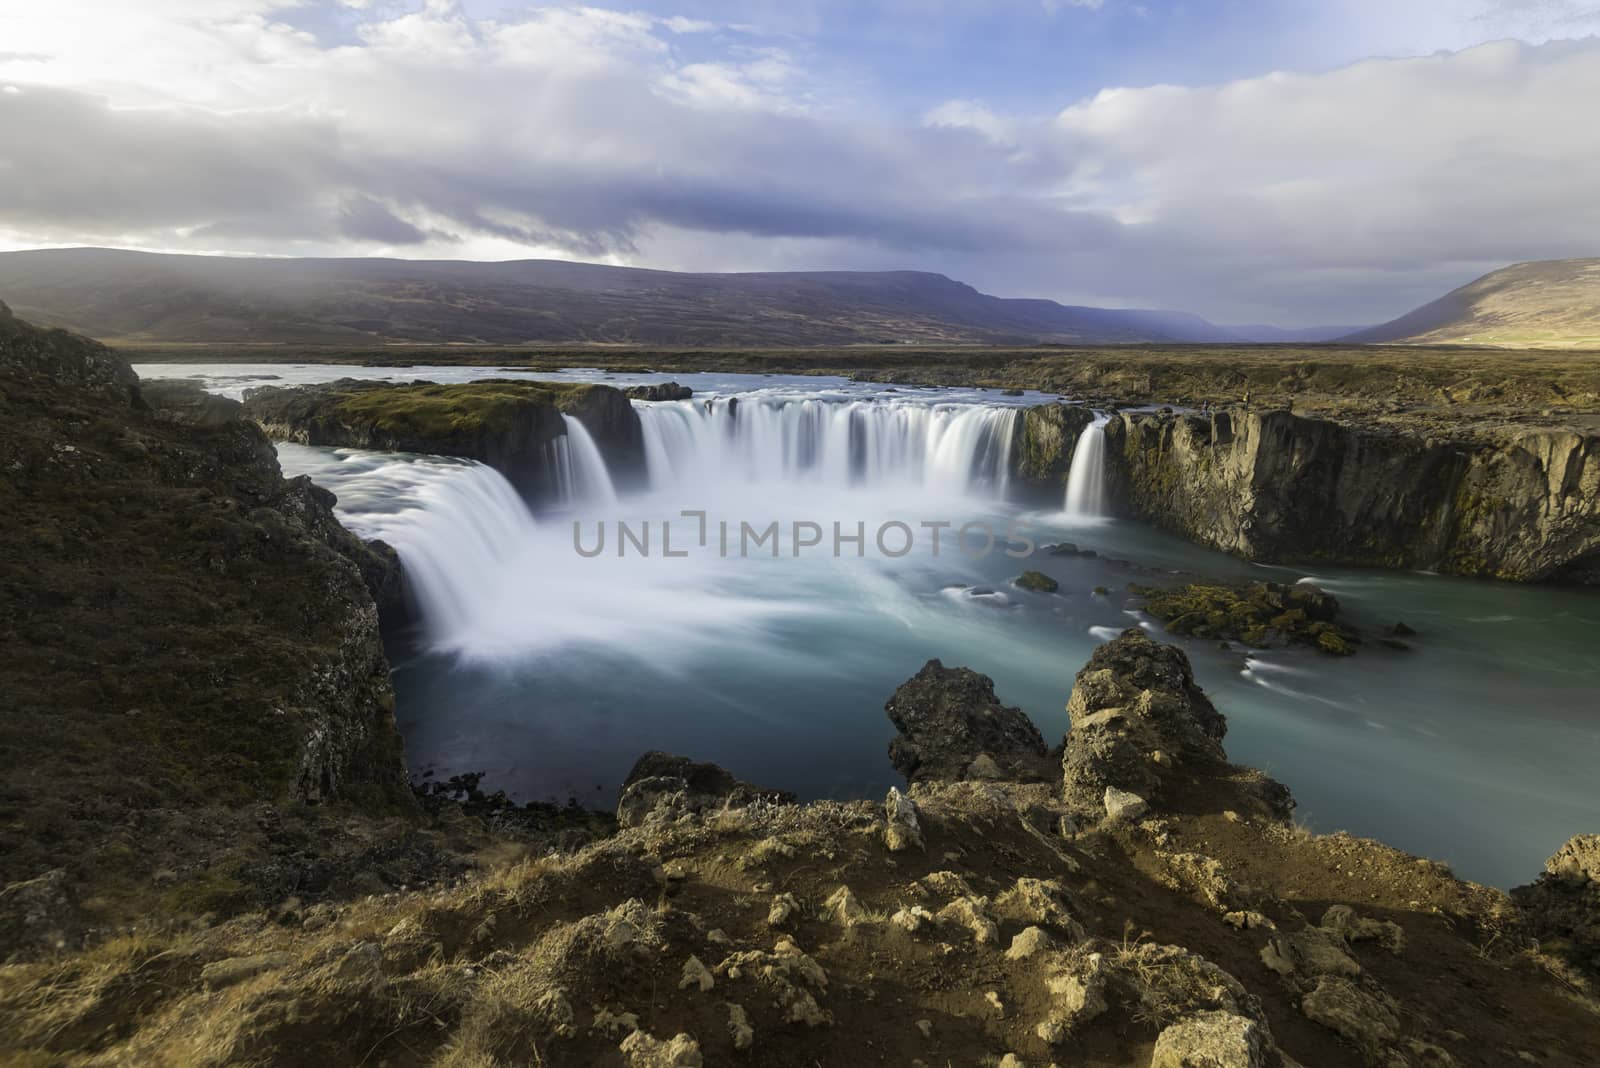 Godafoss is in located in river Skjalfandafljot which runs through Bardardalur and Kinn in Northeast Iceland